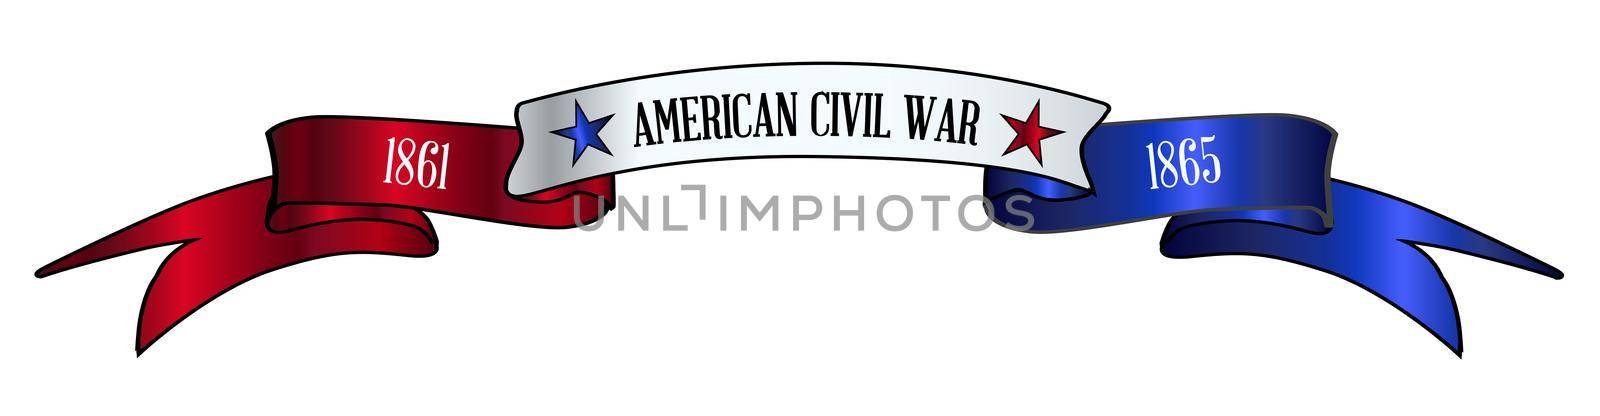 A red white and blue satin or silk ribbon banner with the text American Civil War and stars